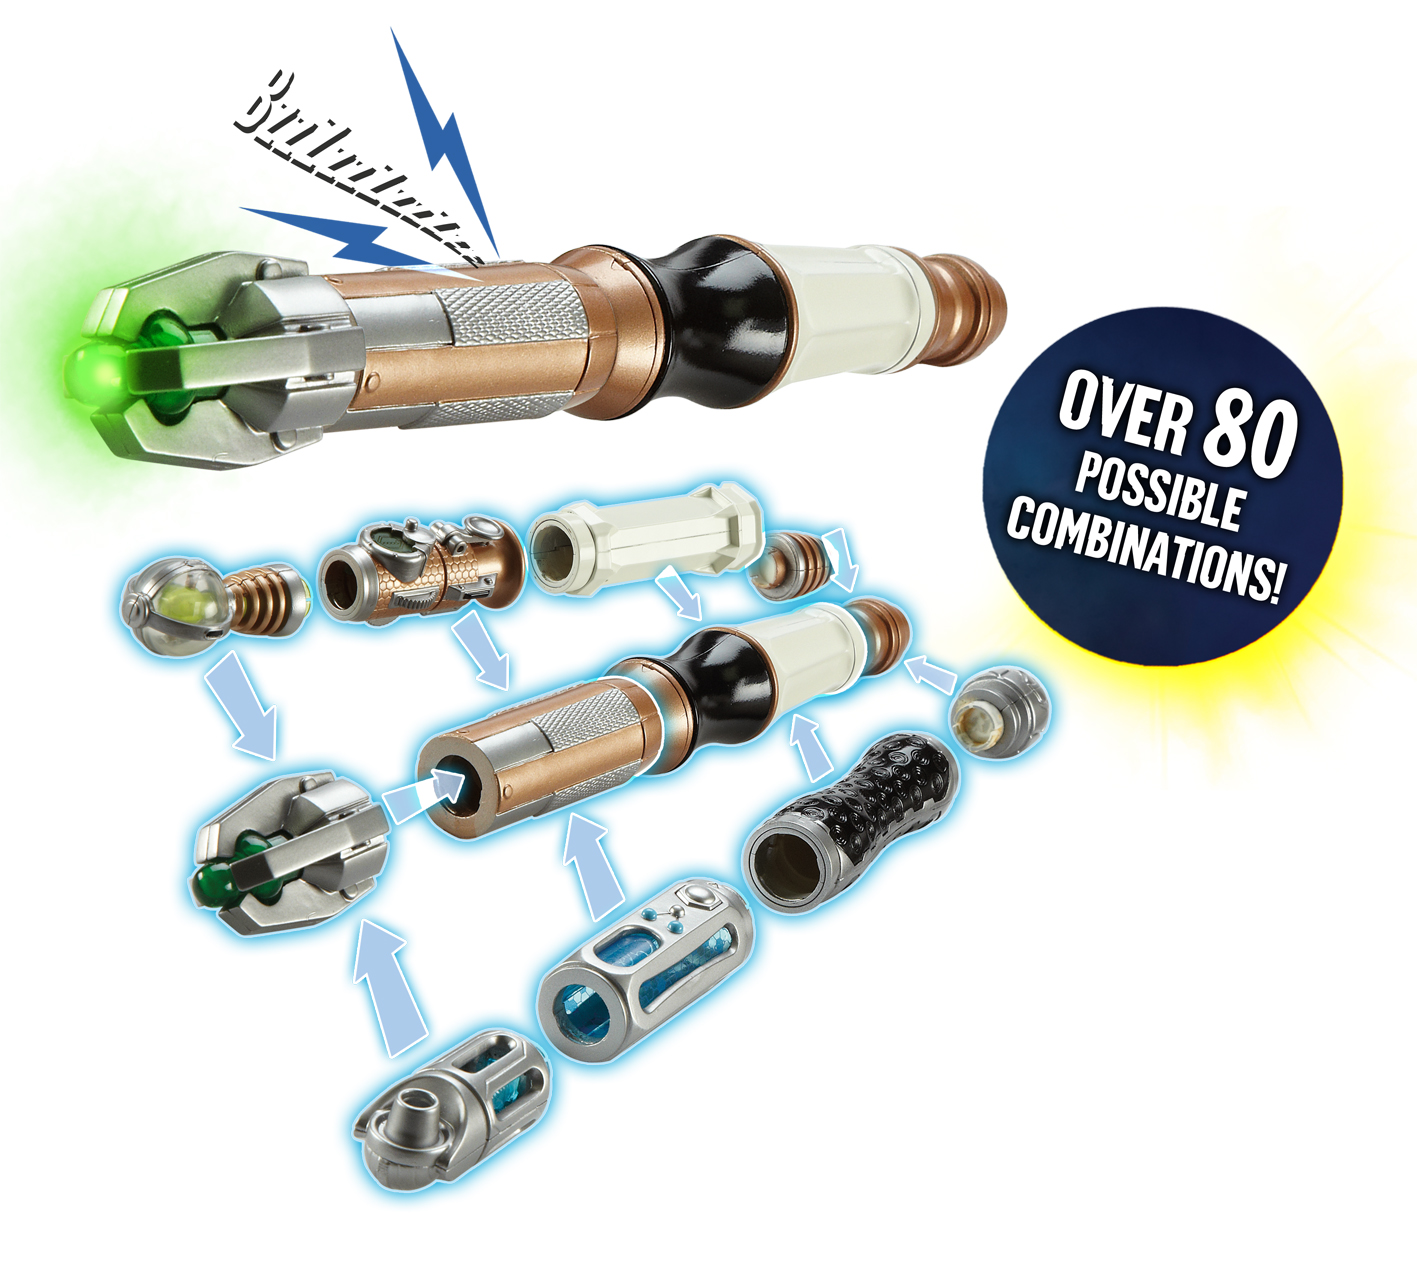 Dr Who Personalise Your Sonic Screwdriver Set